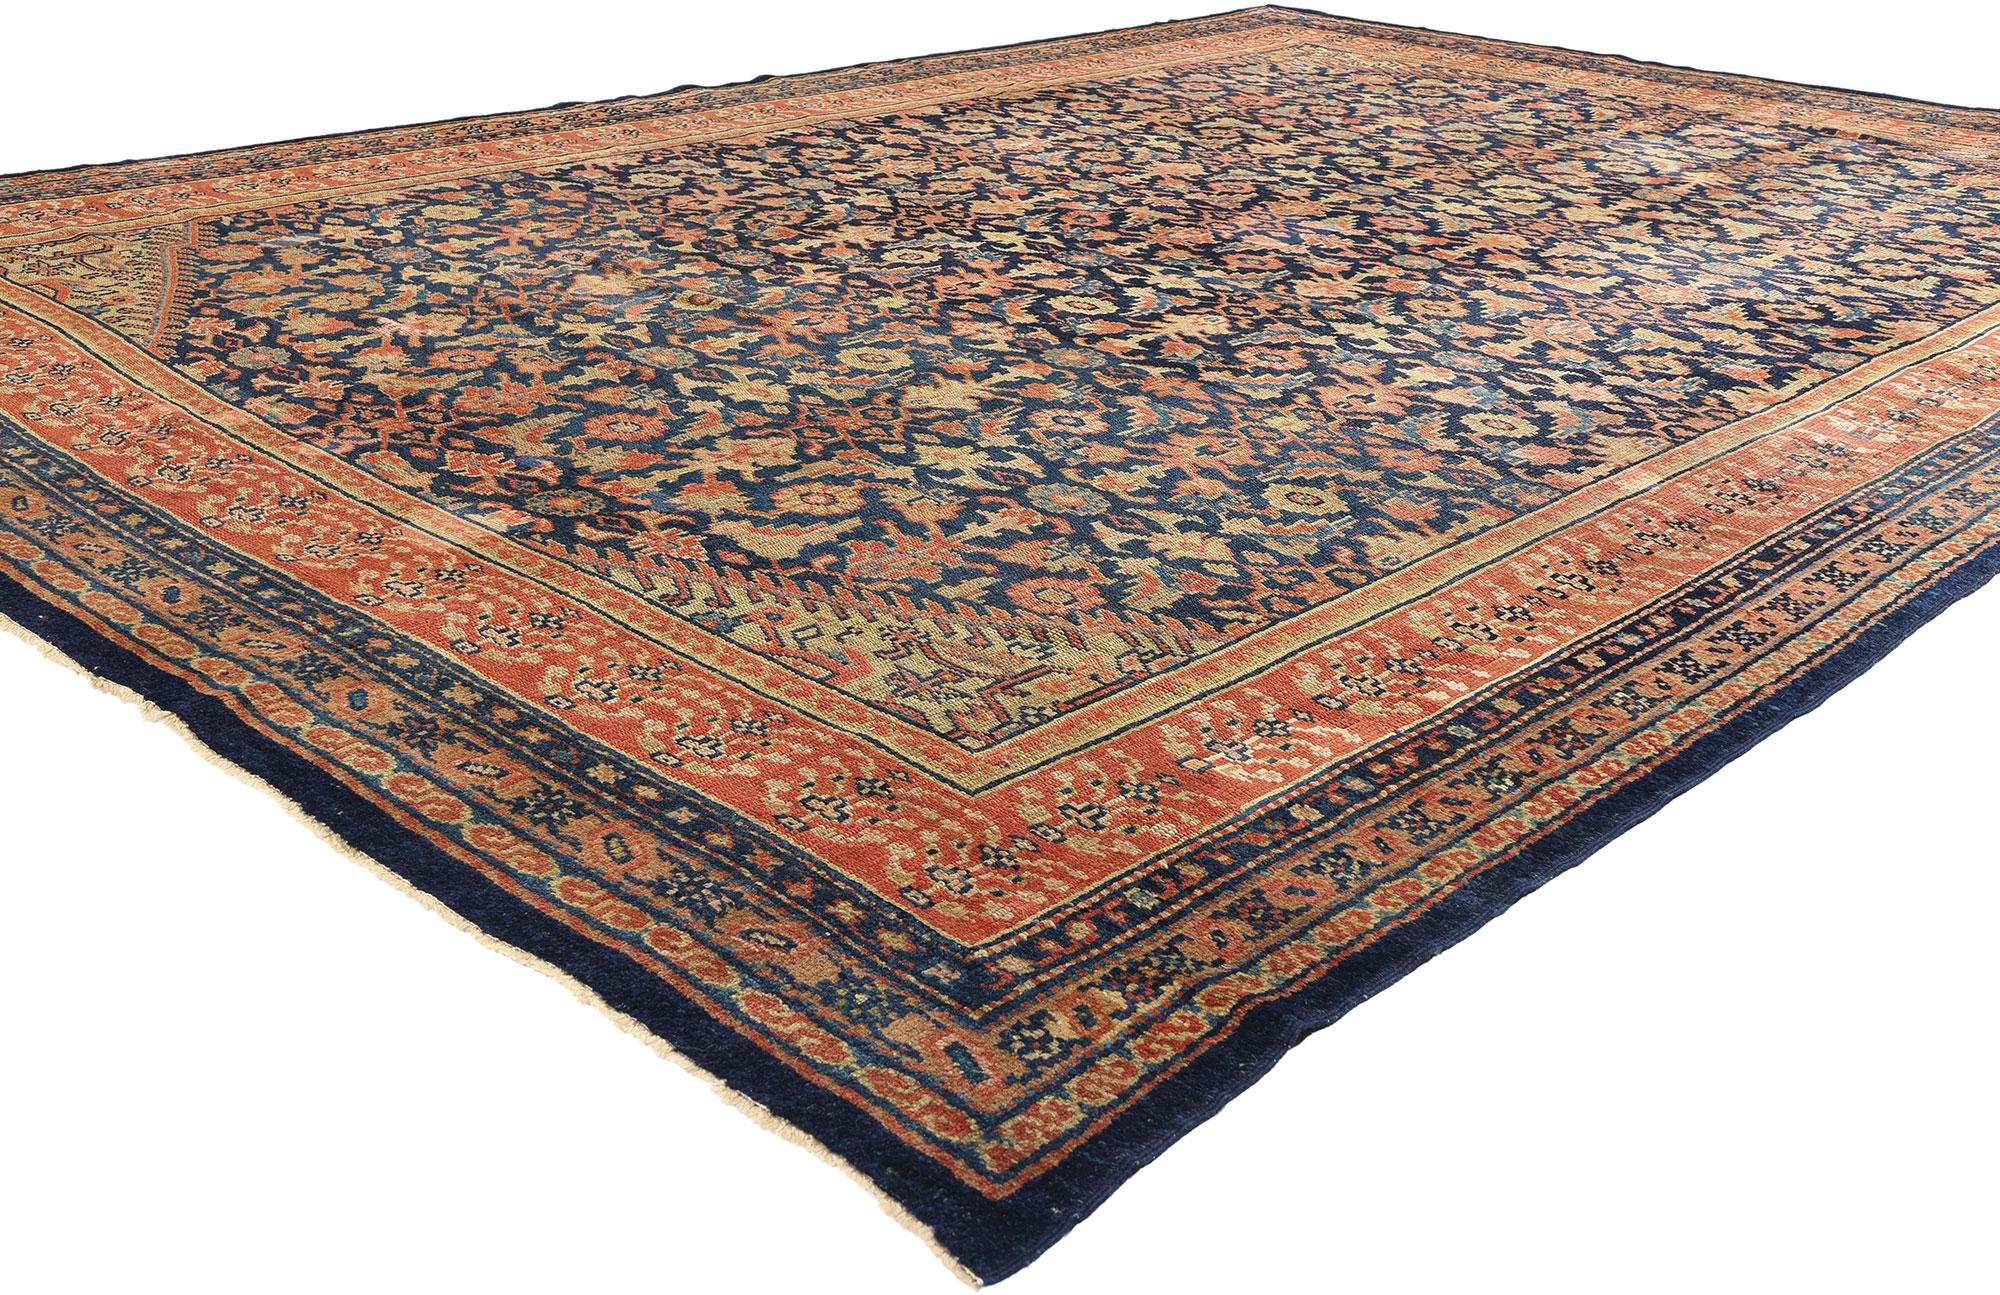 51634 Late 19th Century Antique Persian Kurdish Rug, 09'07 x 13'04. Persian Kurdish rugs, hailing from Kurdish regions predominantly in Iran but also found in segments of Iraq, Turkey, and Syria, are revered for their exceptional quality, artisanal